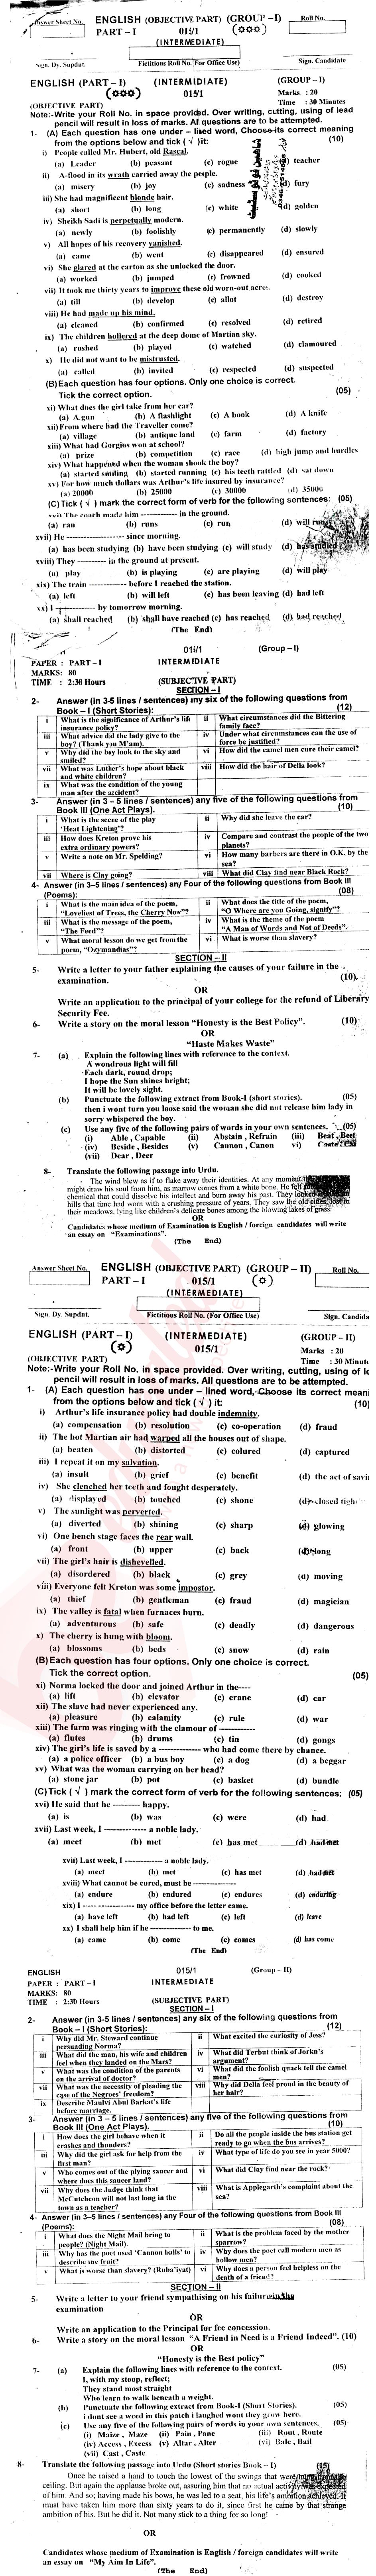 English 11th class Past Paper Group 1 BISE AJK 2015